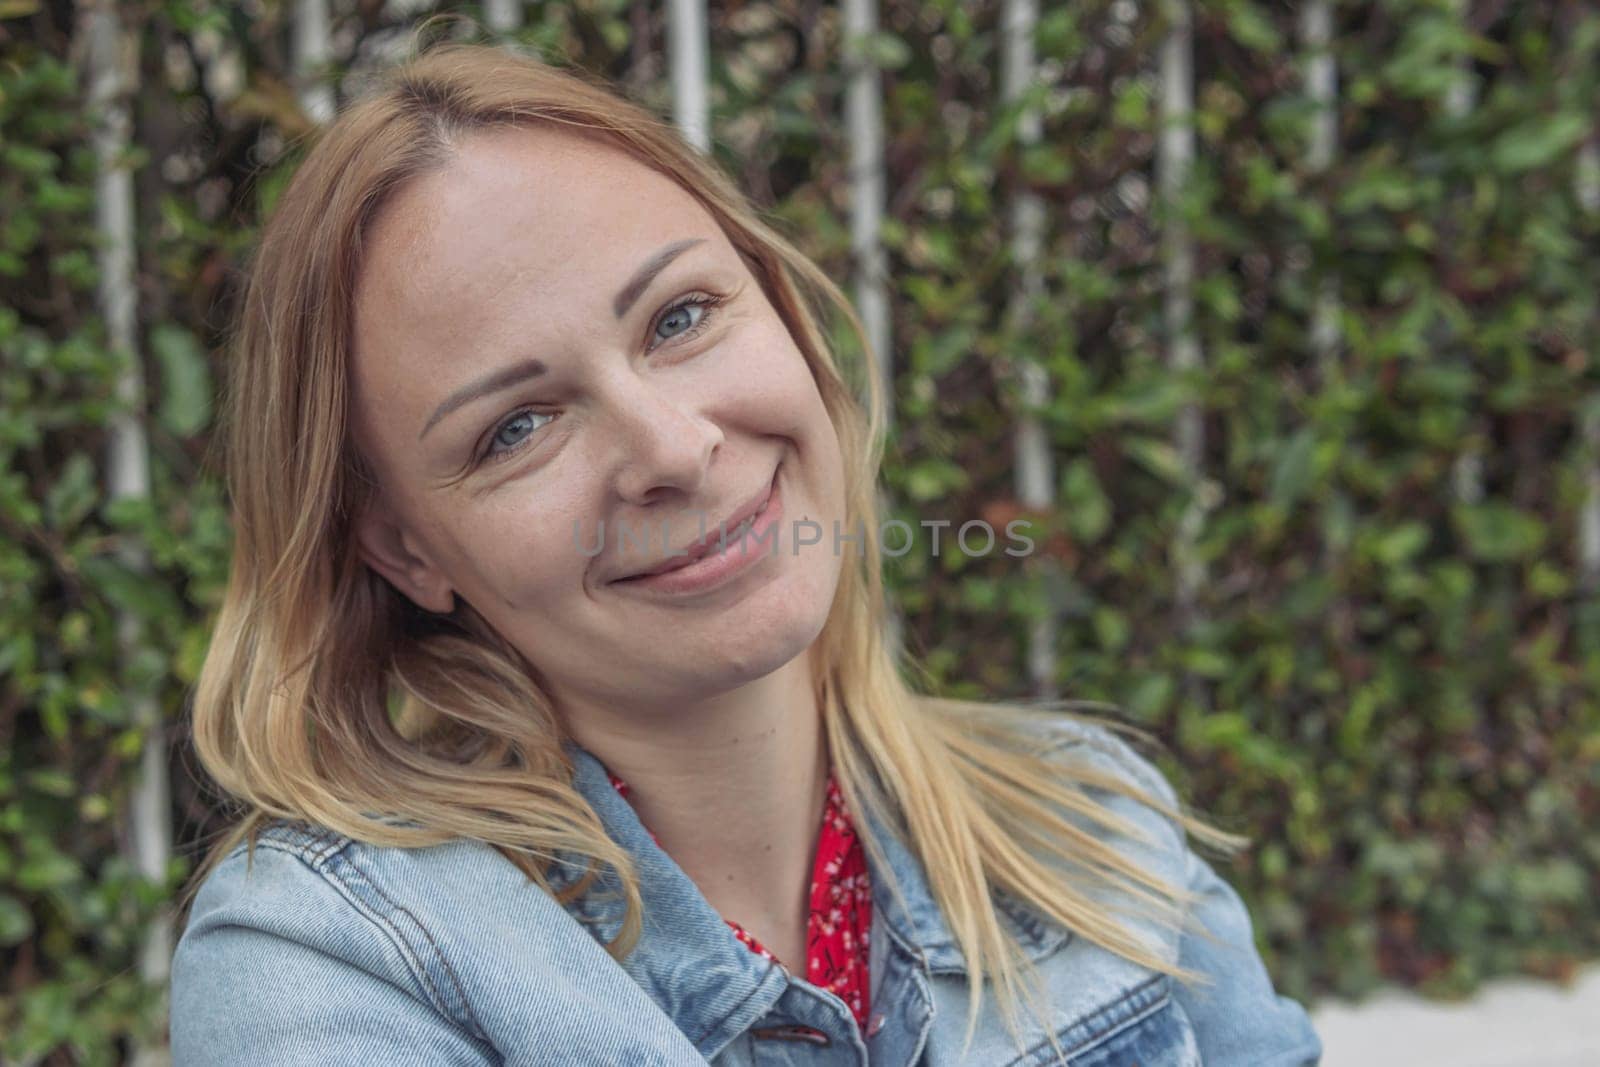 a girl with blond hair in a denim jacket sits in a park dreaming and smiling close-up, portrait .human emotions by PopOff